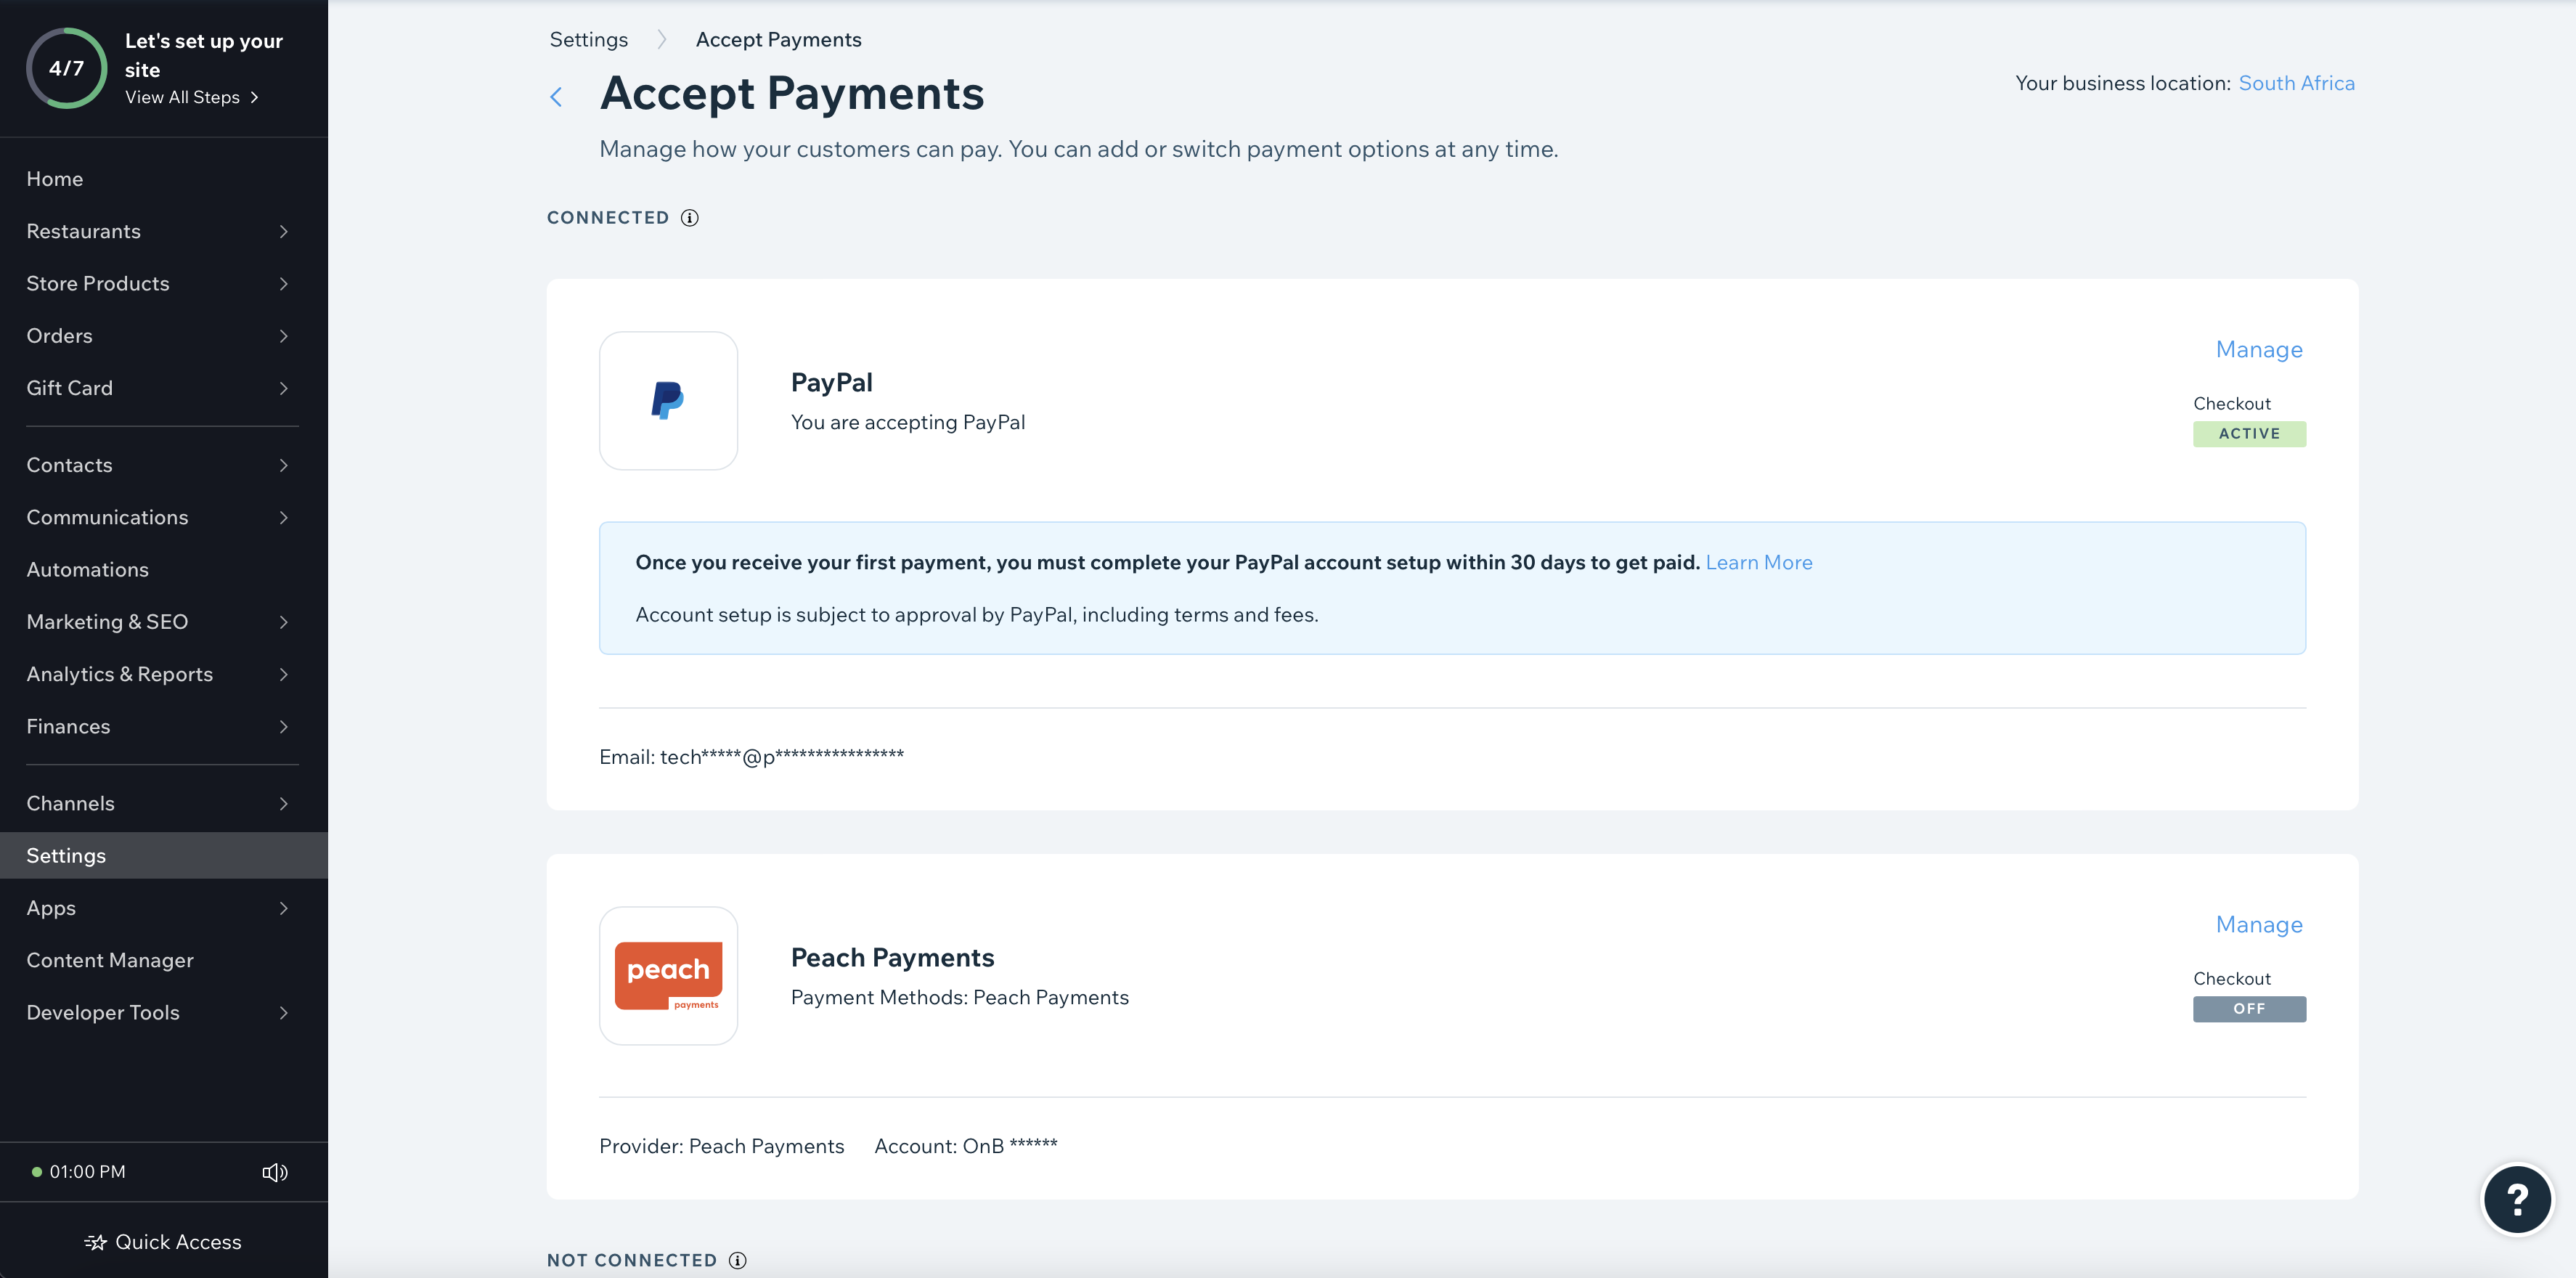 Manage Peach Payments.